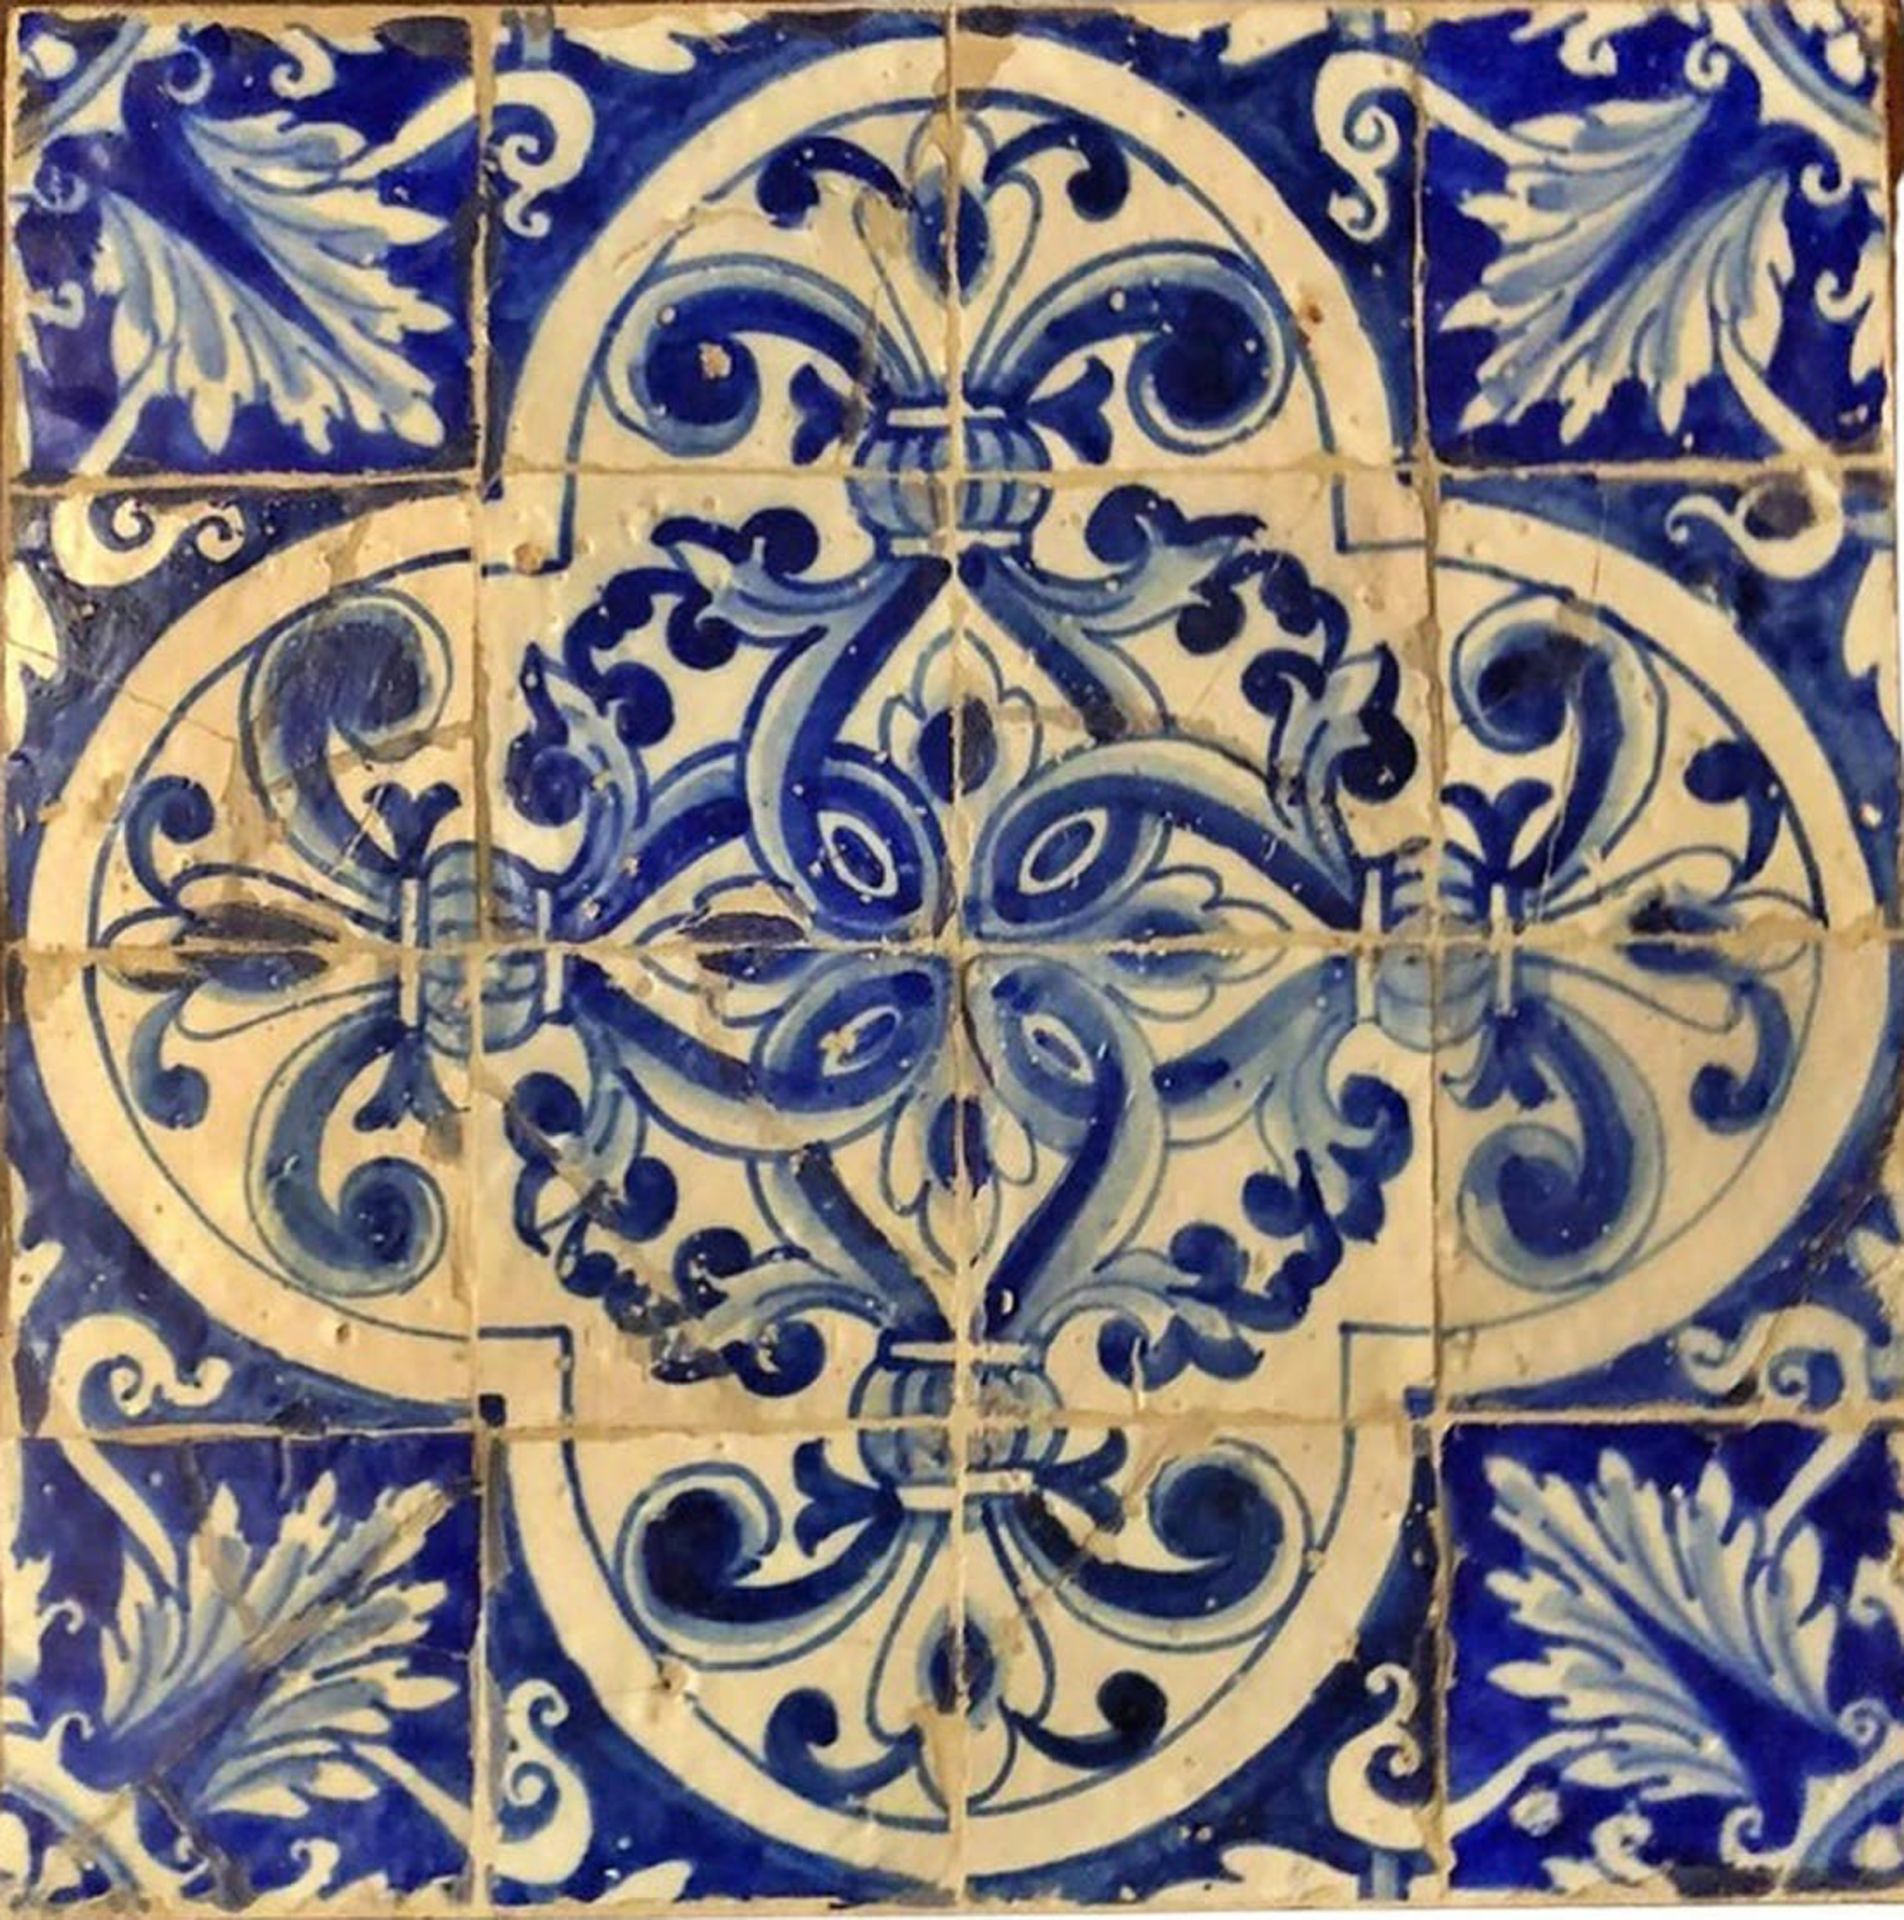 Panel of Portuguese Azulejos from the 17th century - Image 2 of 5